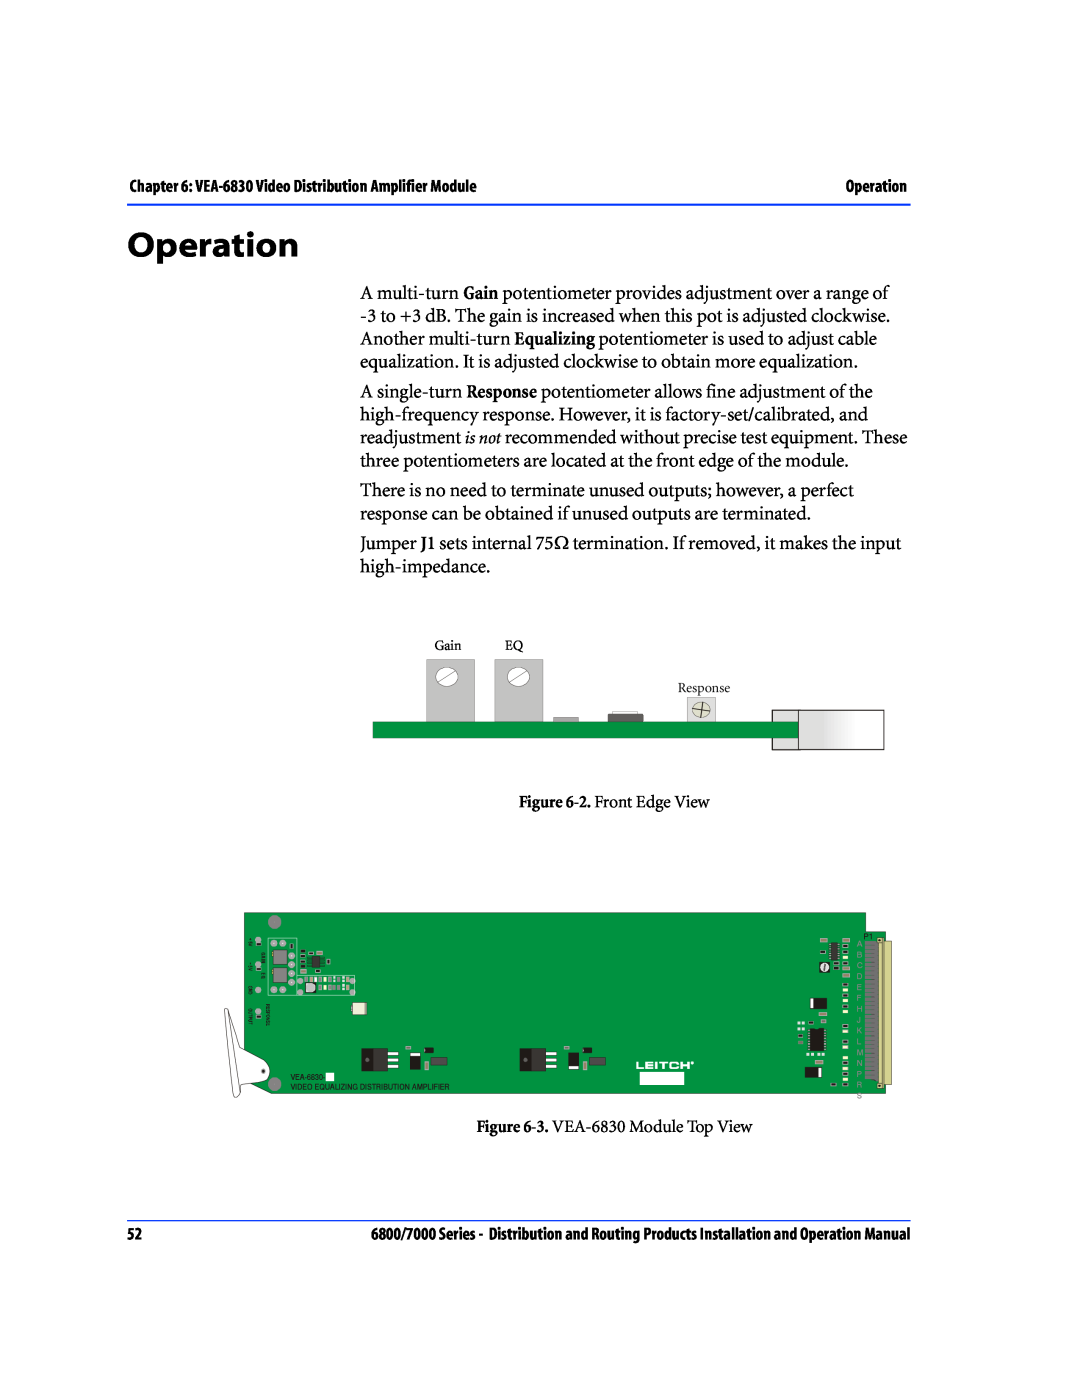 Nokia 7000 Series, 6800 Series operation manual Operation, 2. Front Edge View, 3. VEA-6830 Module Top View 